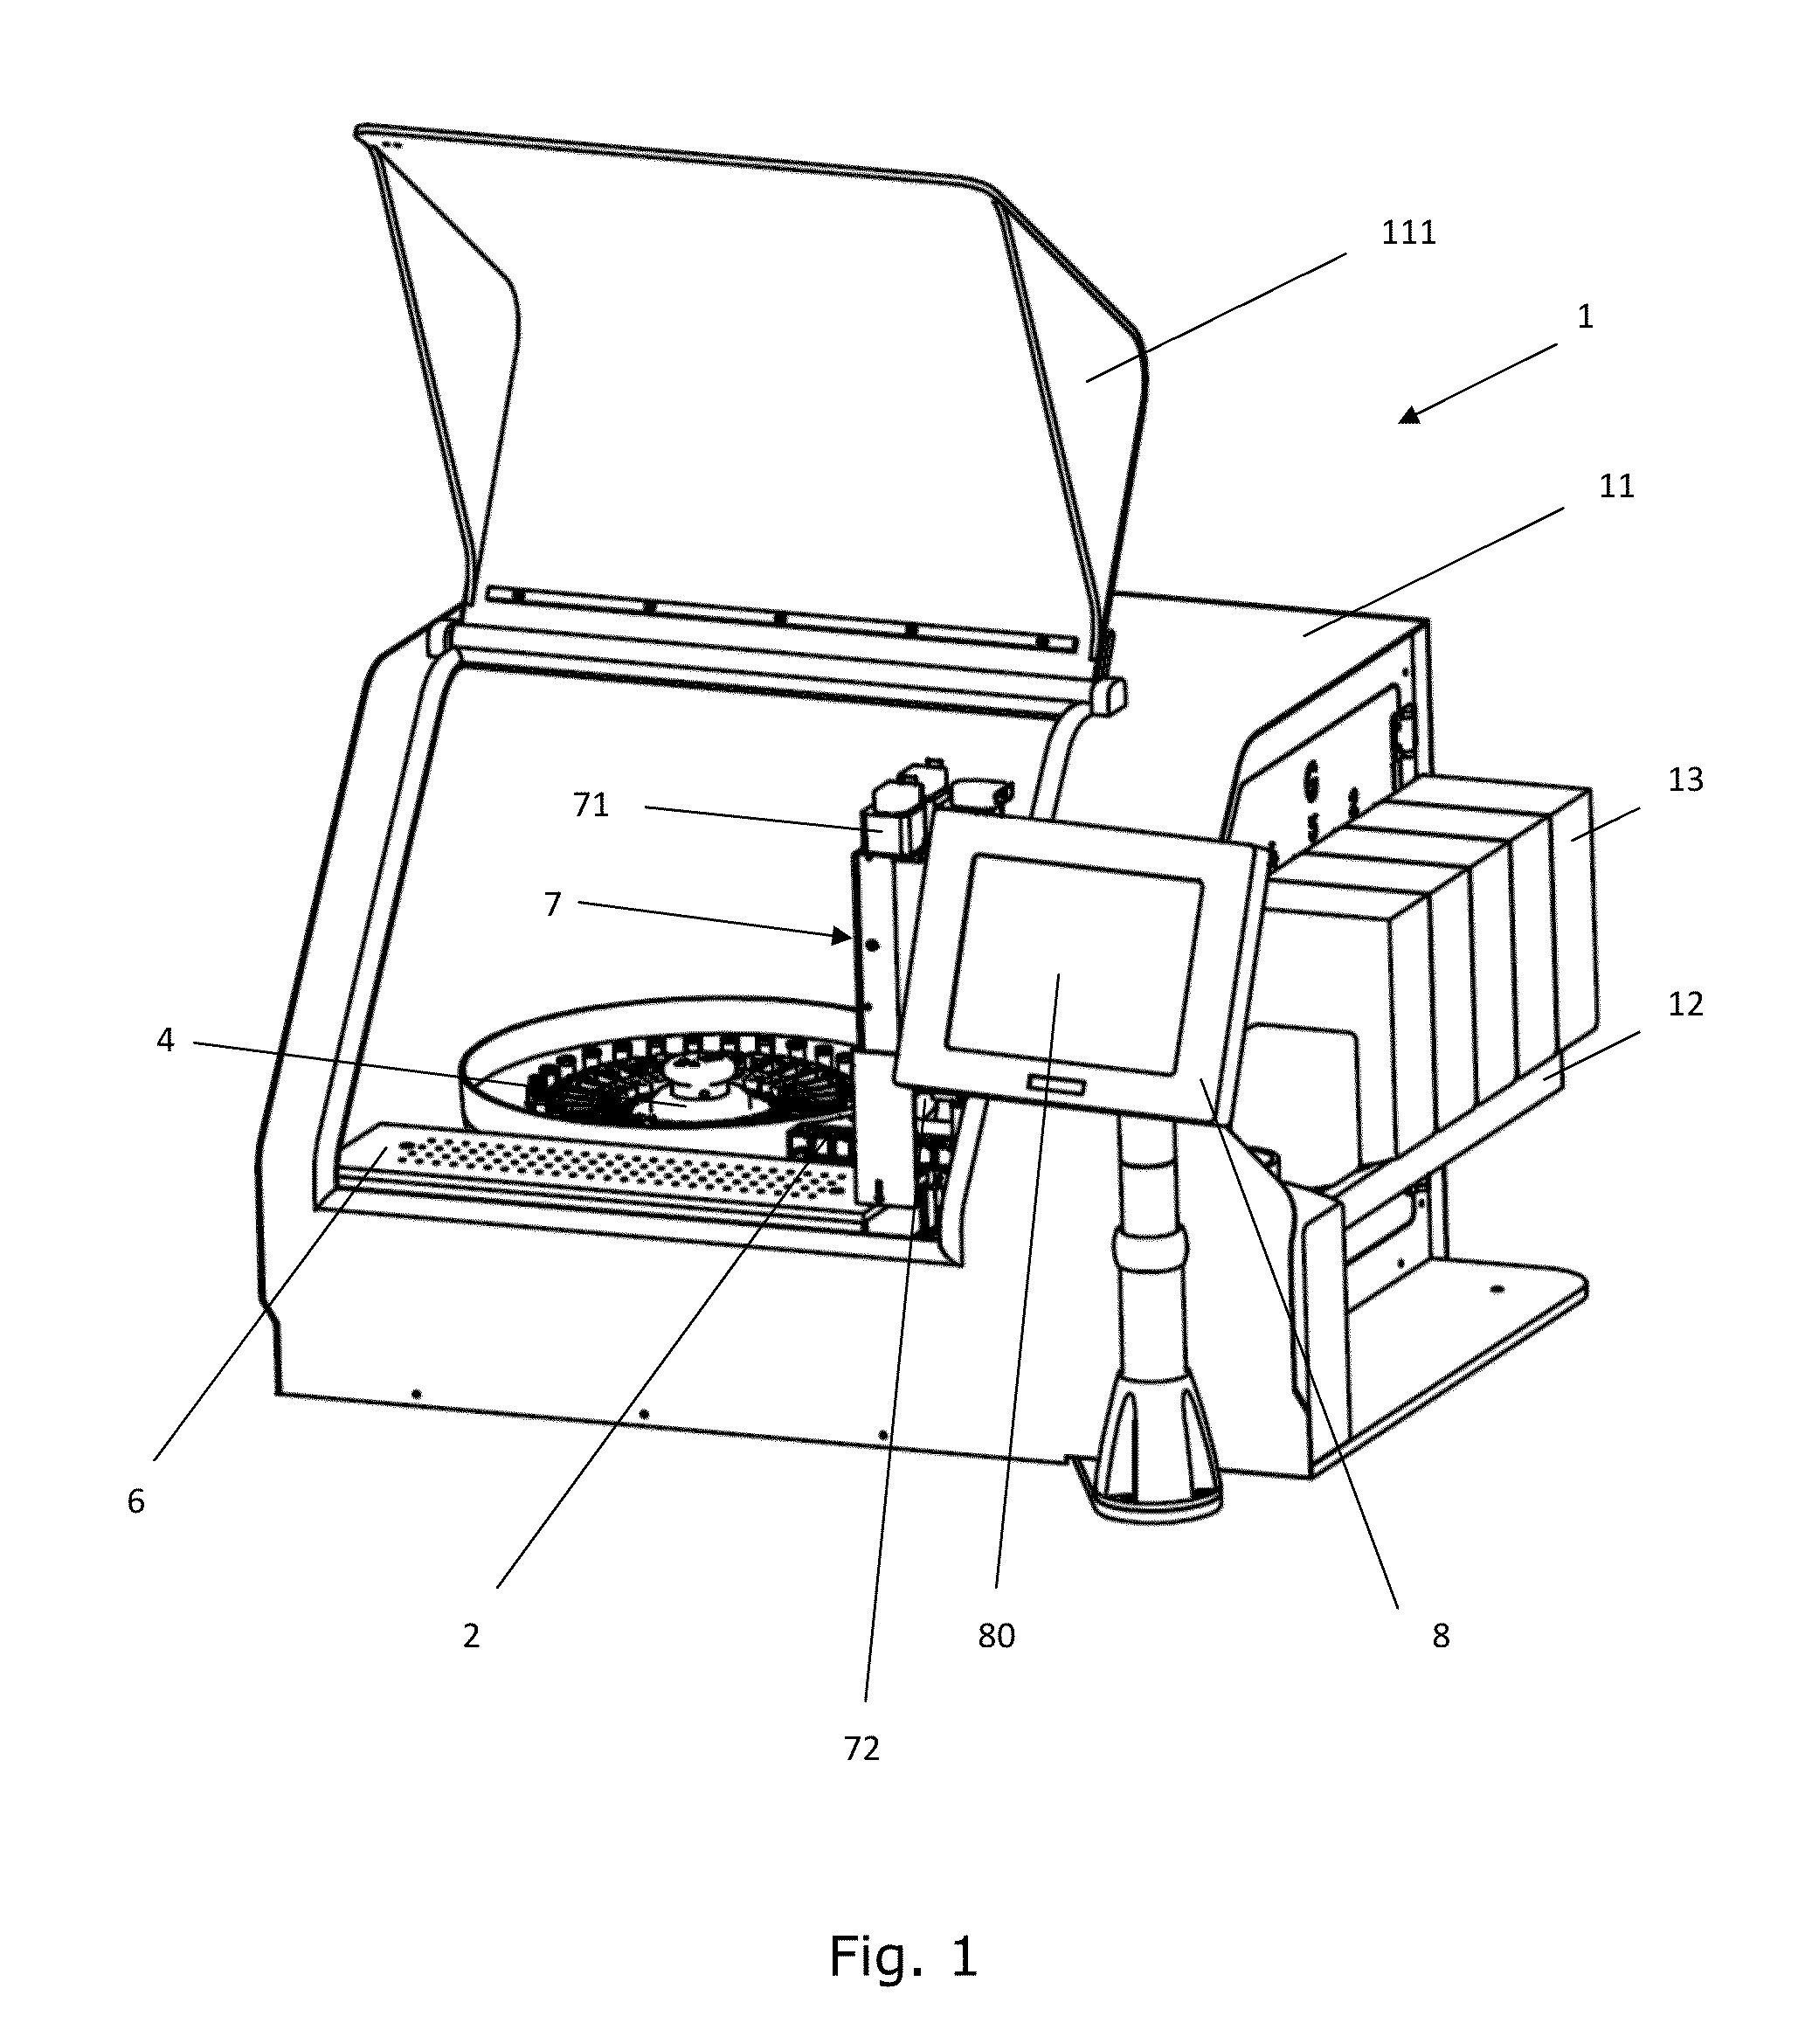 System, apparatuses and devices for pretreating cells